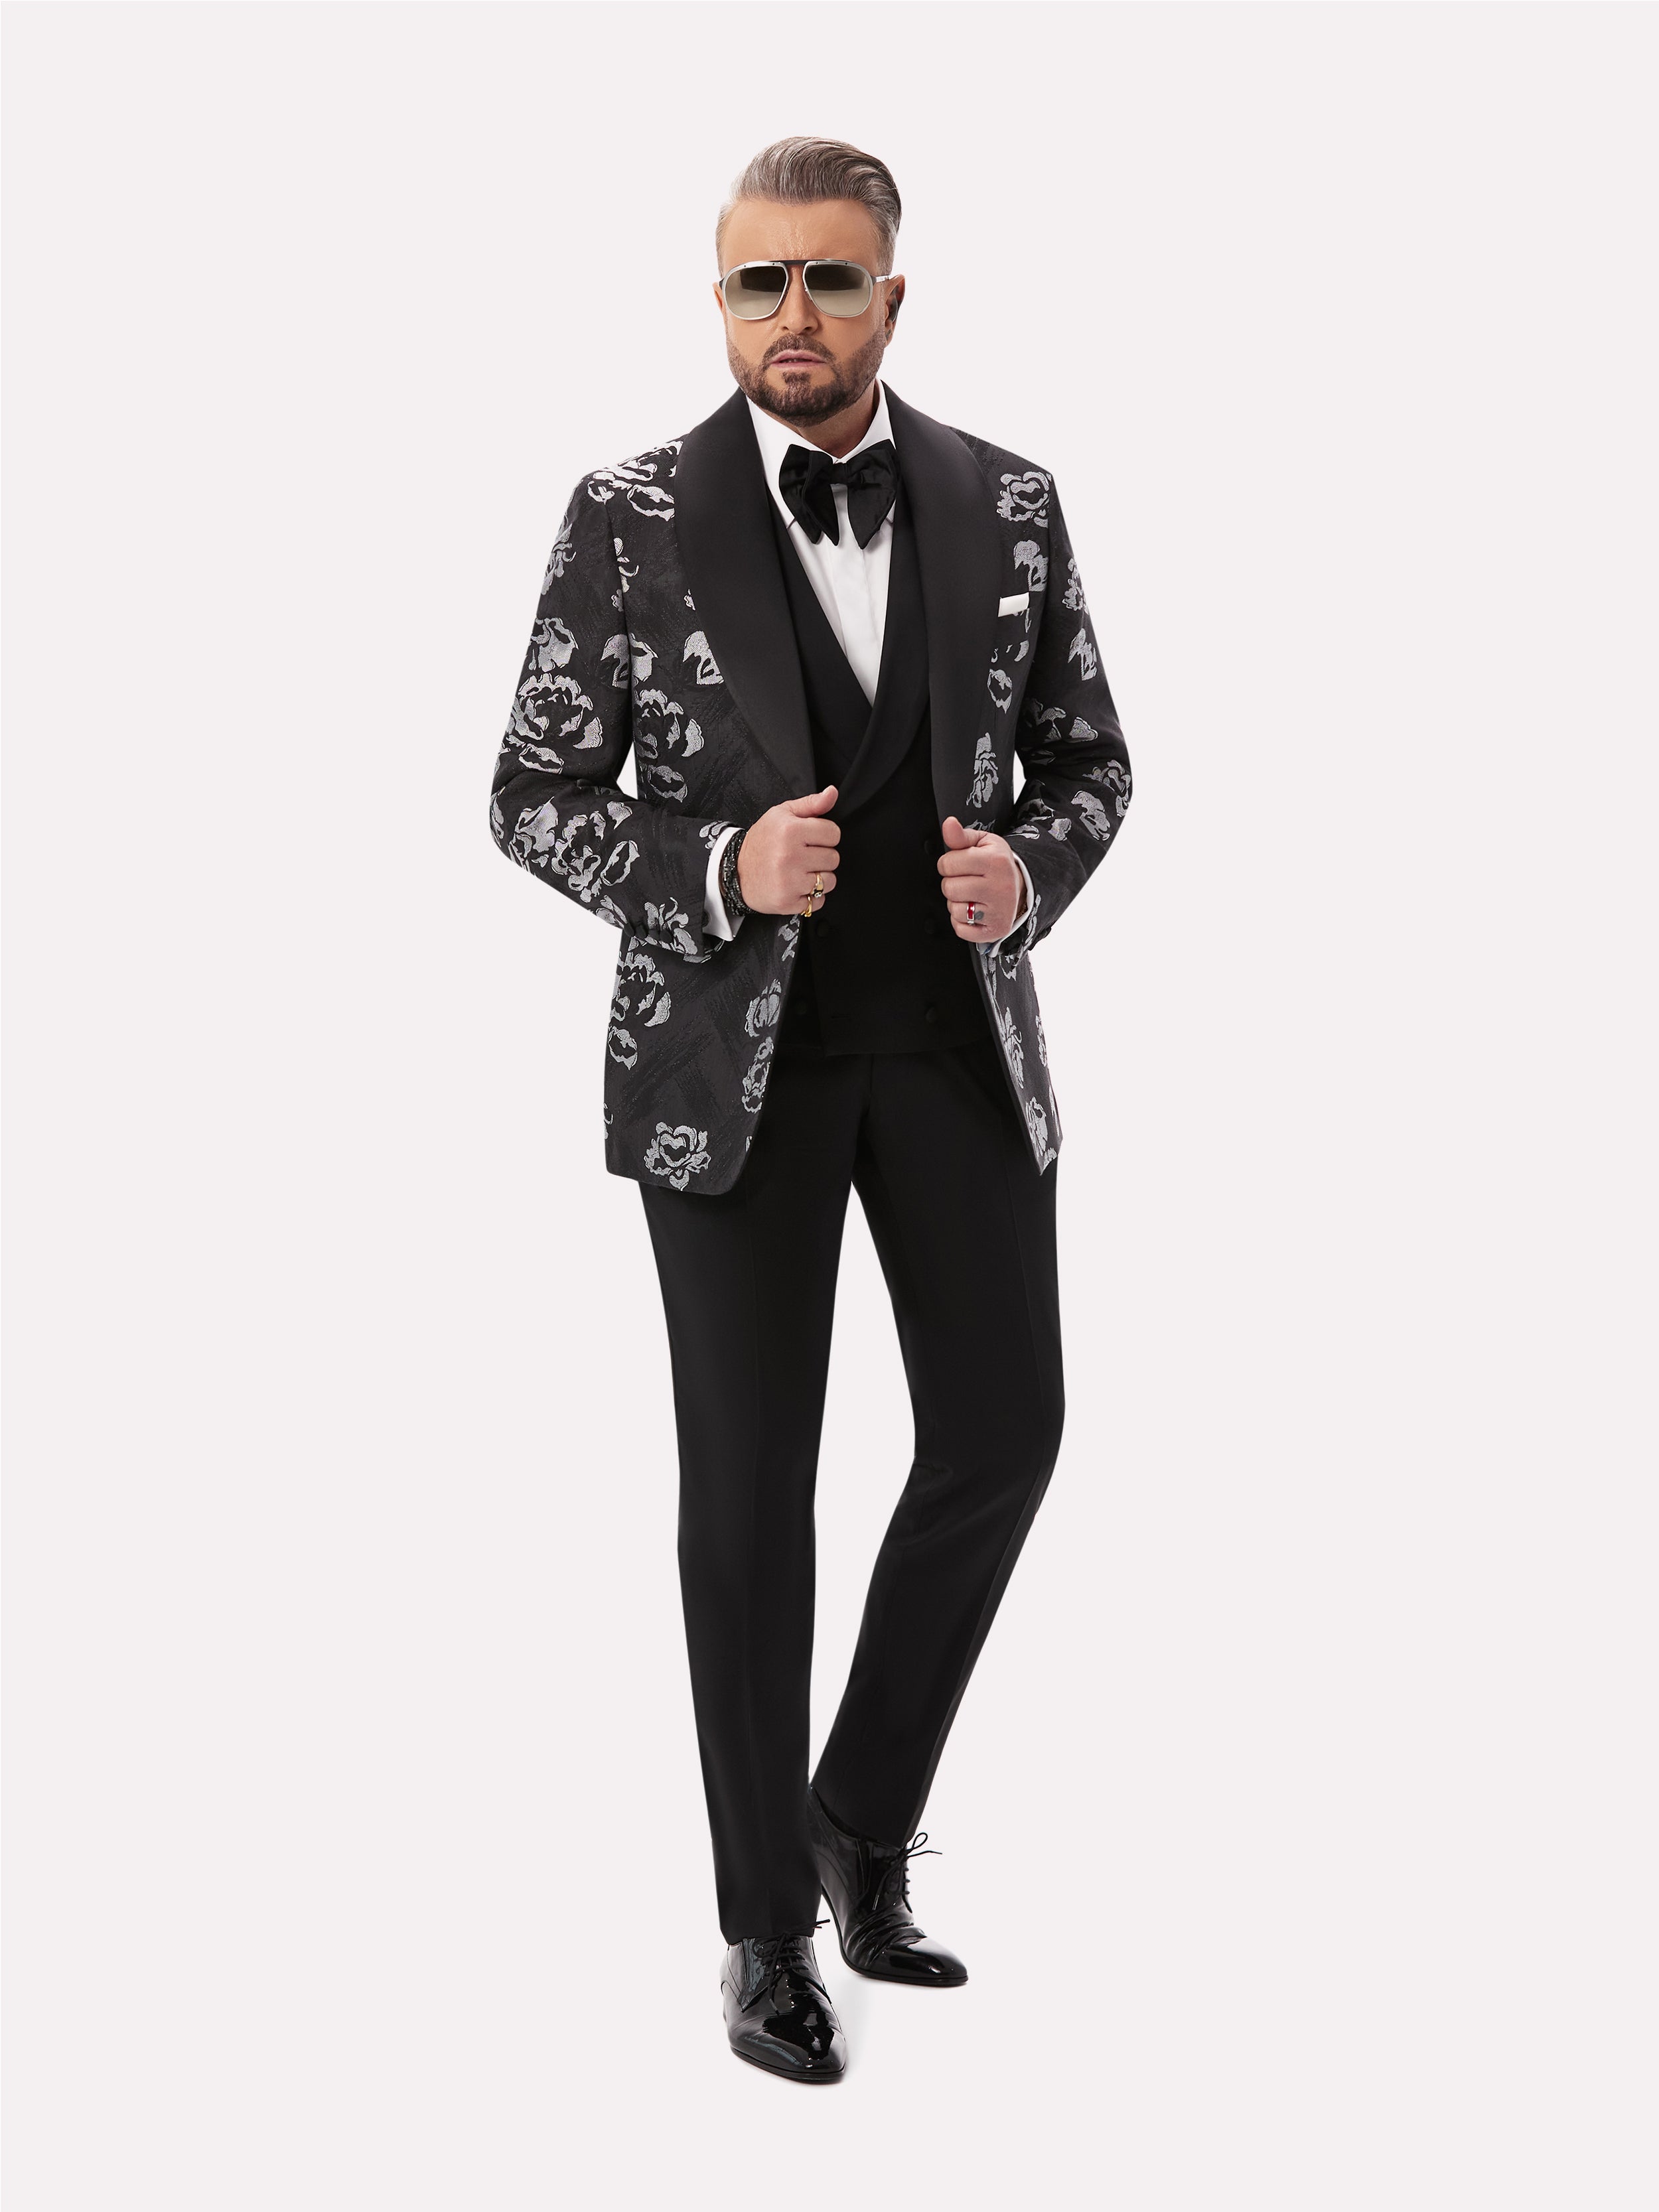 Black tuxedo jacket with silver floral pattern